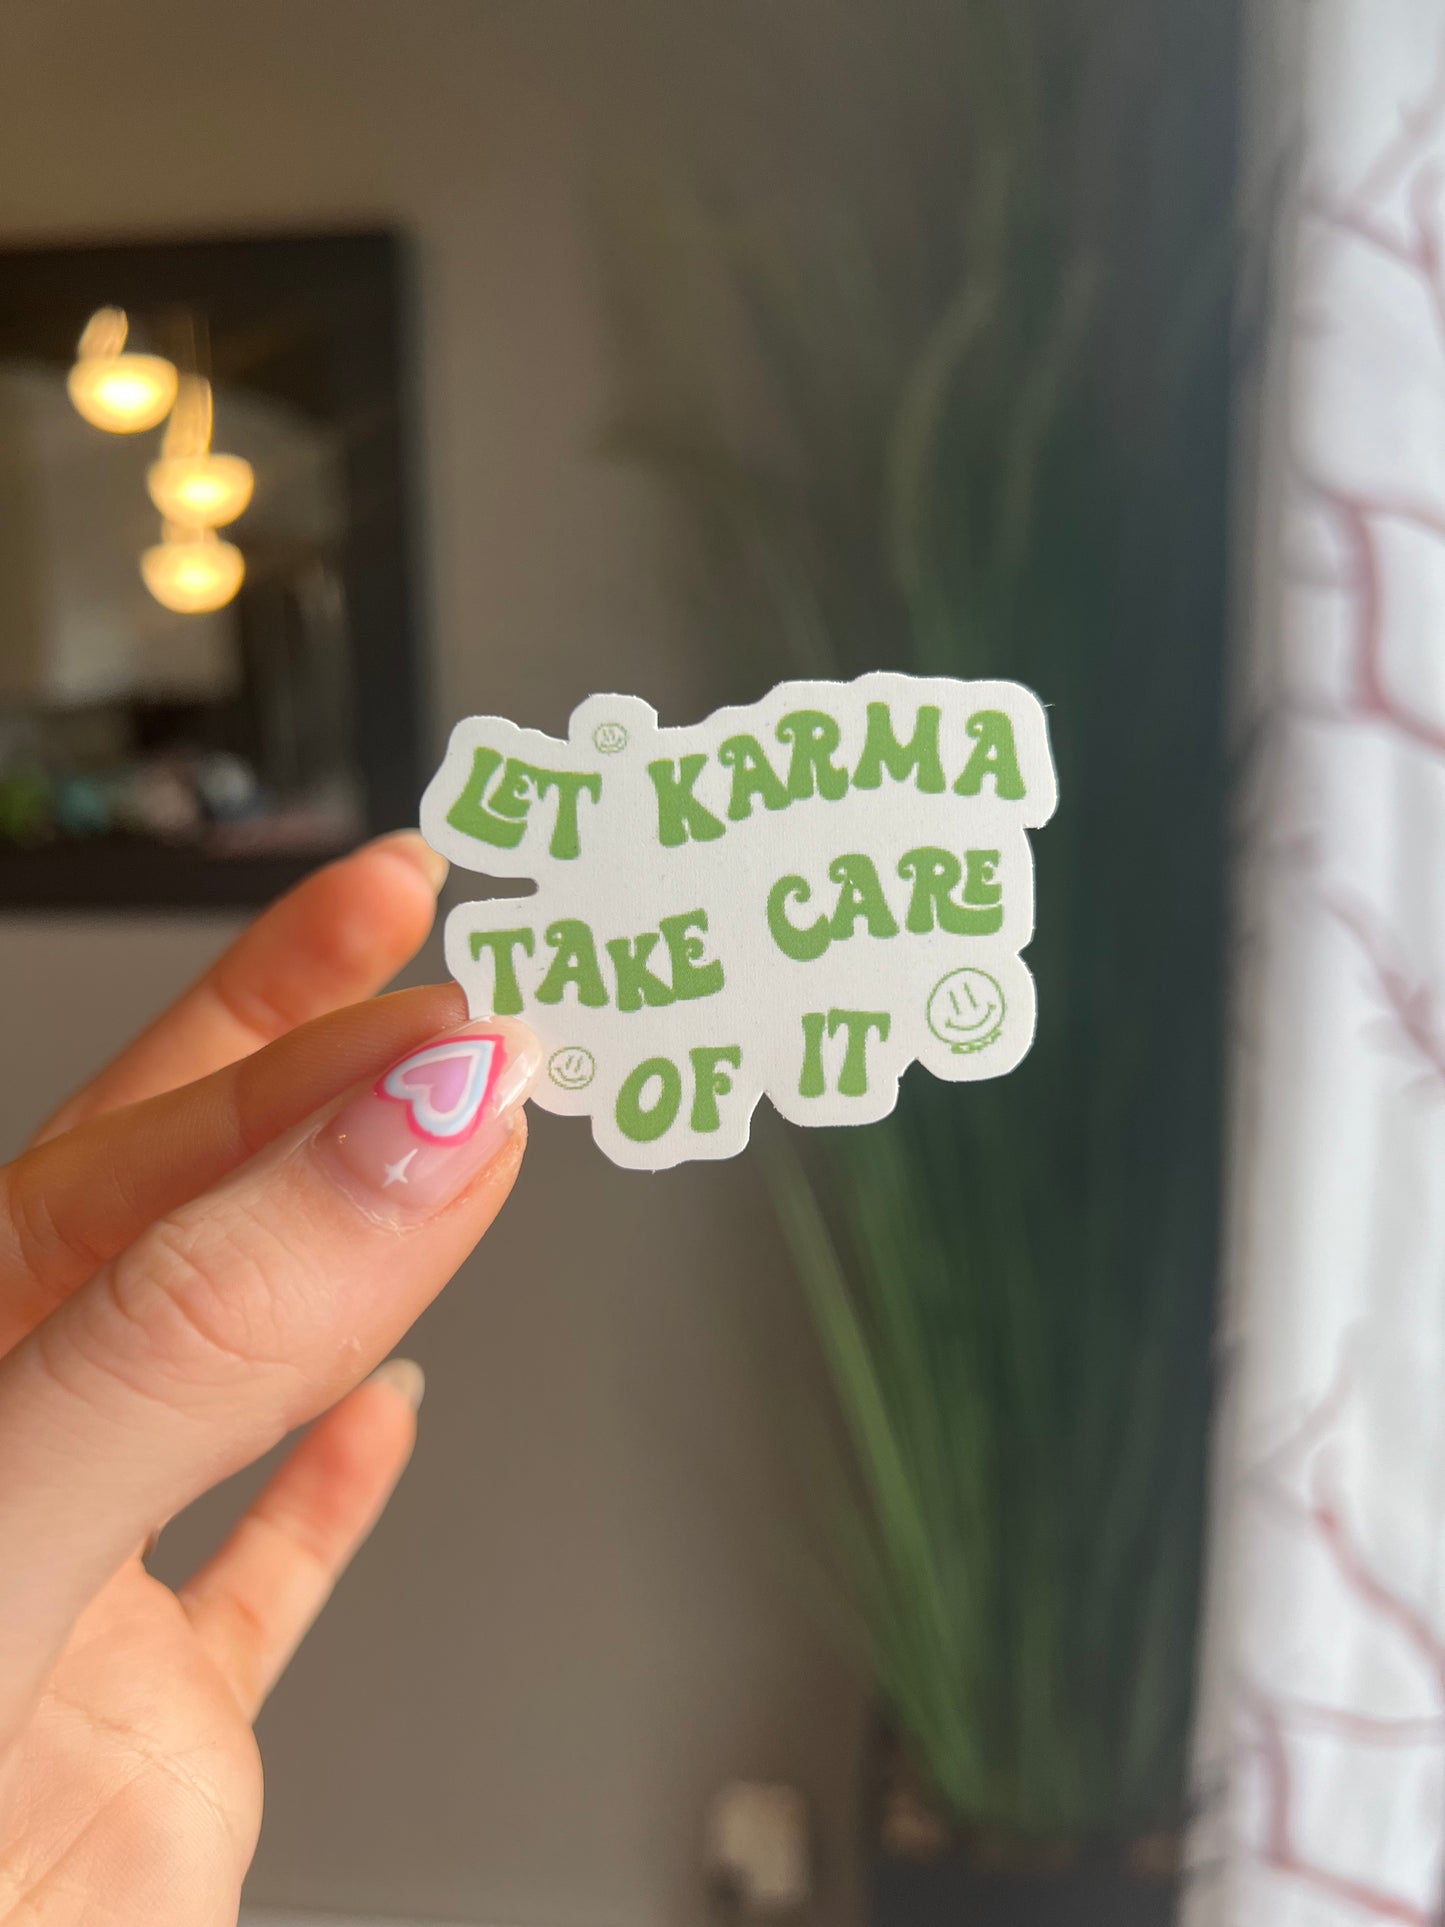 "Let karma take care of it" stickers